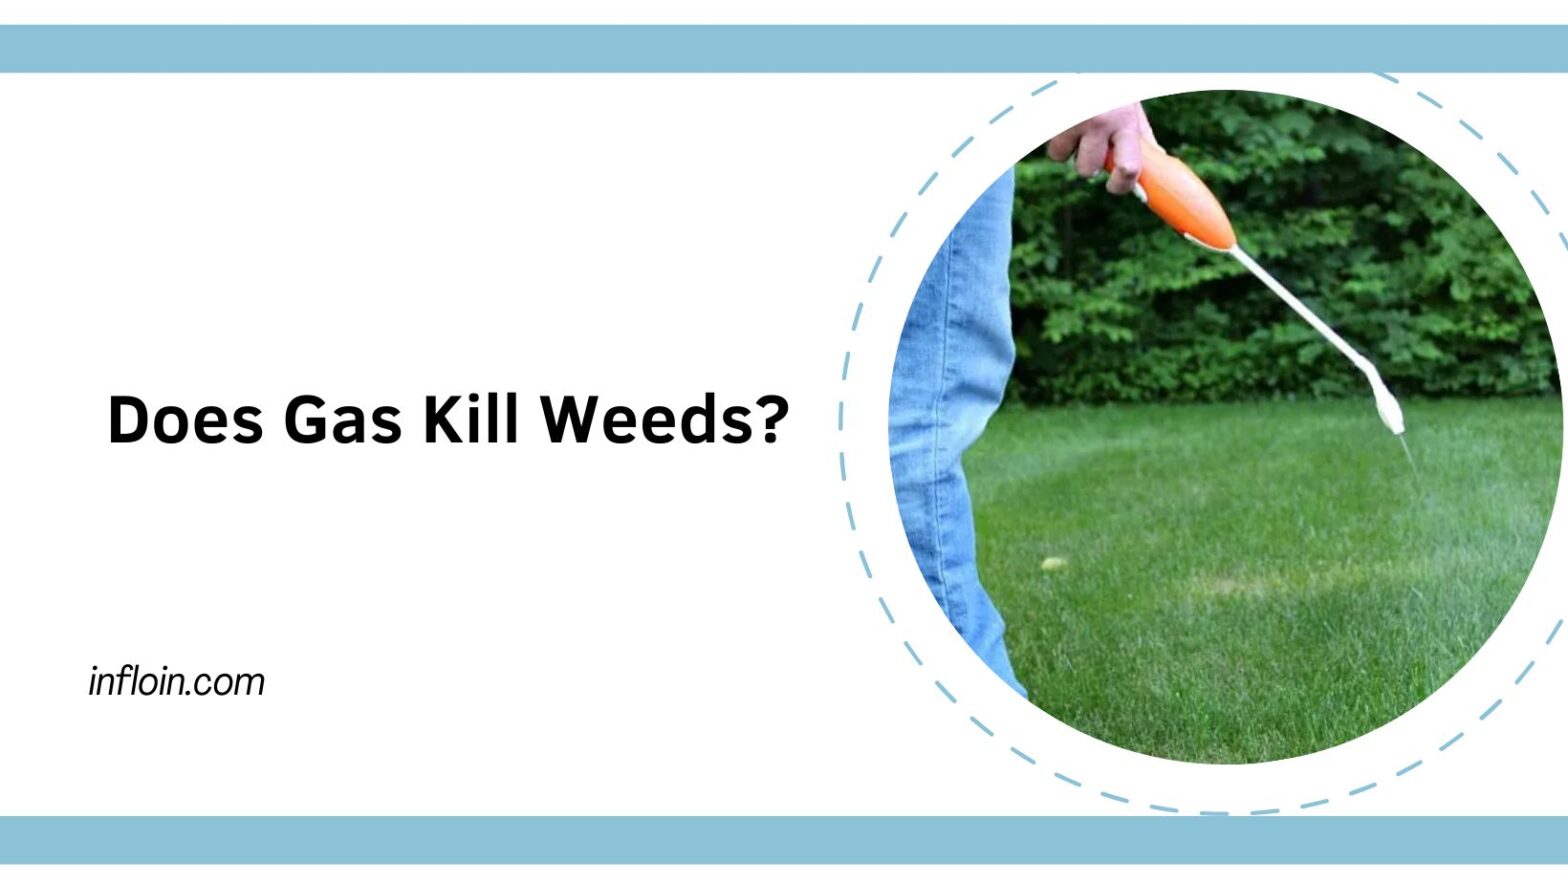 Does Gas Kill Weeds